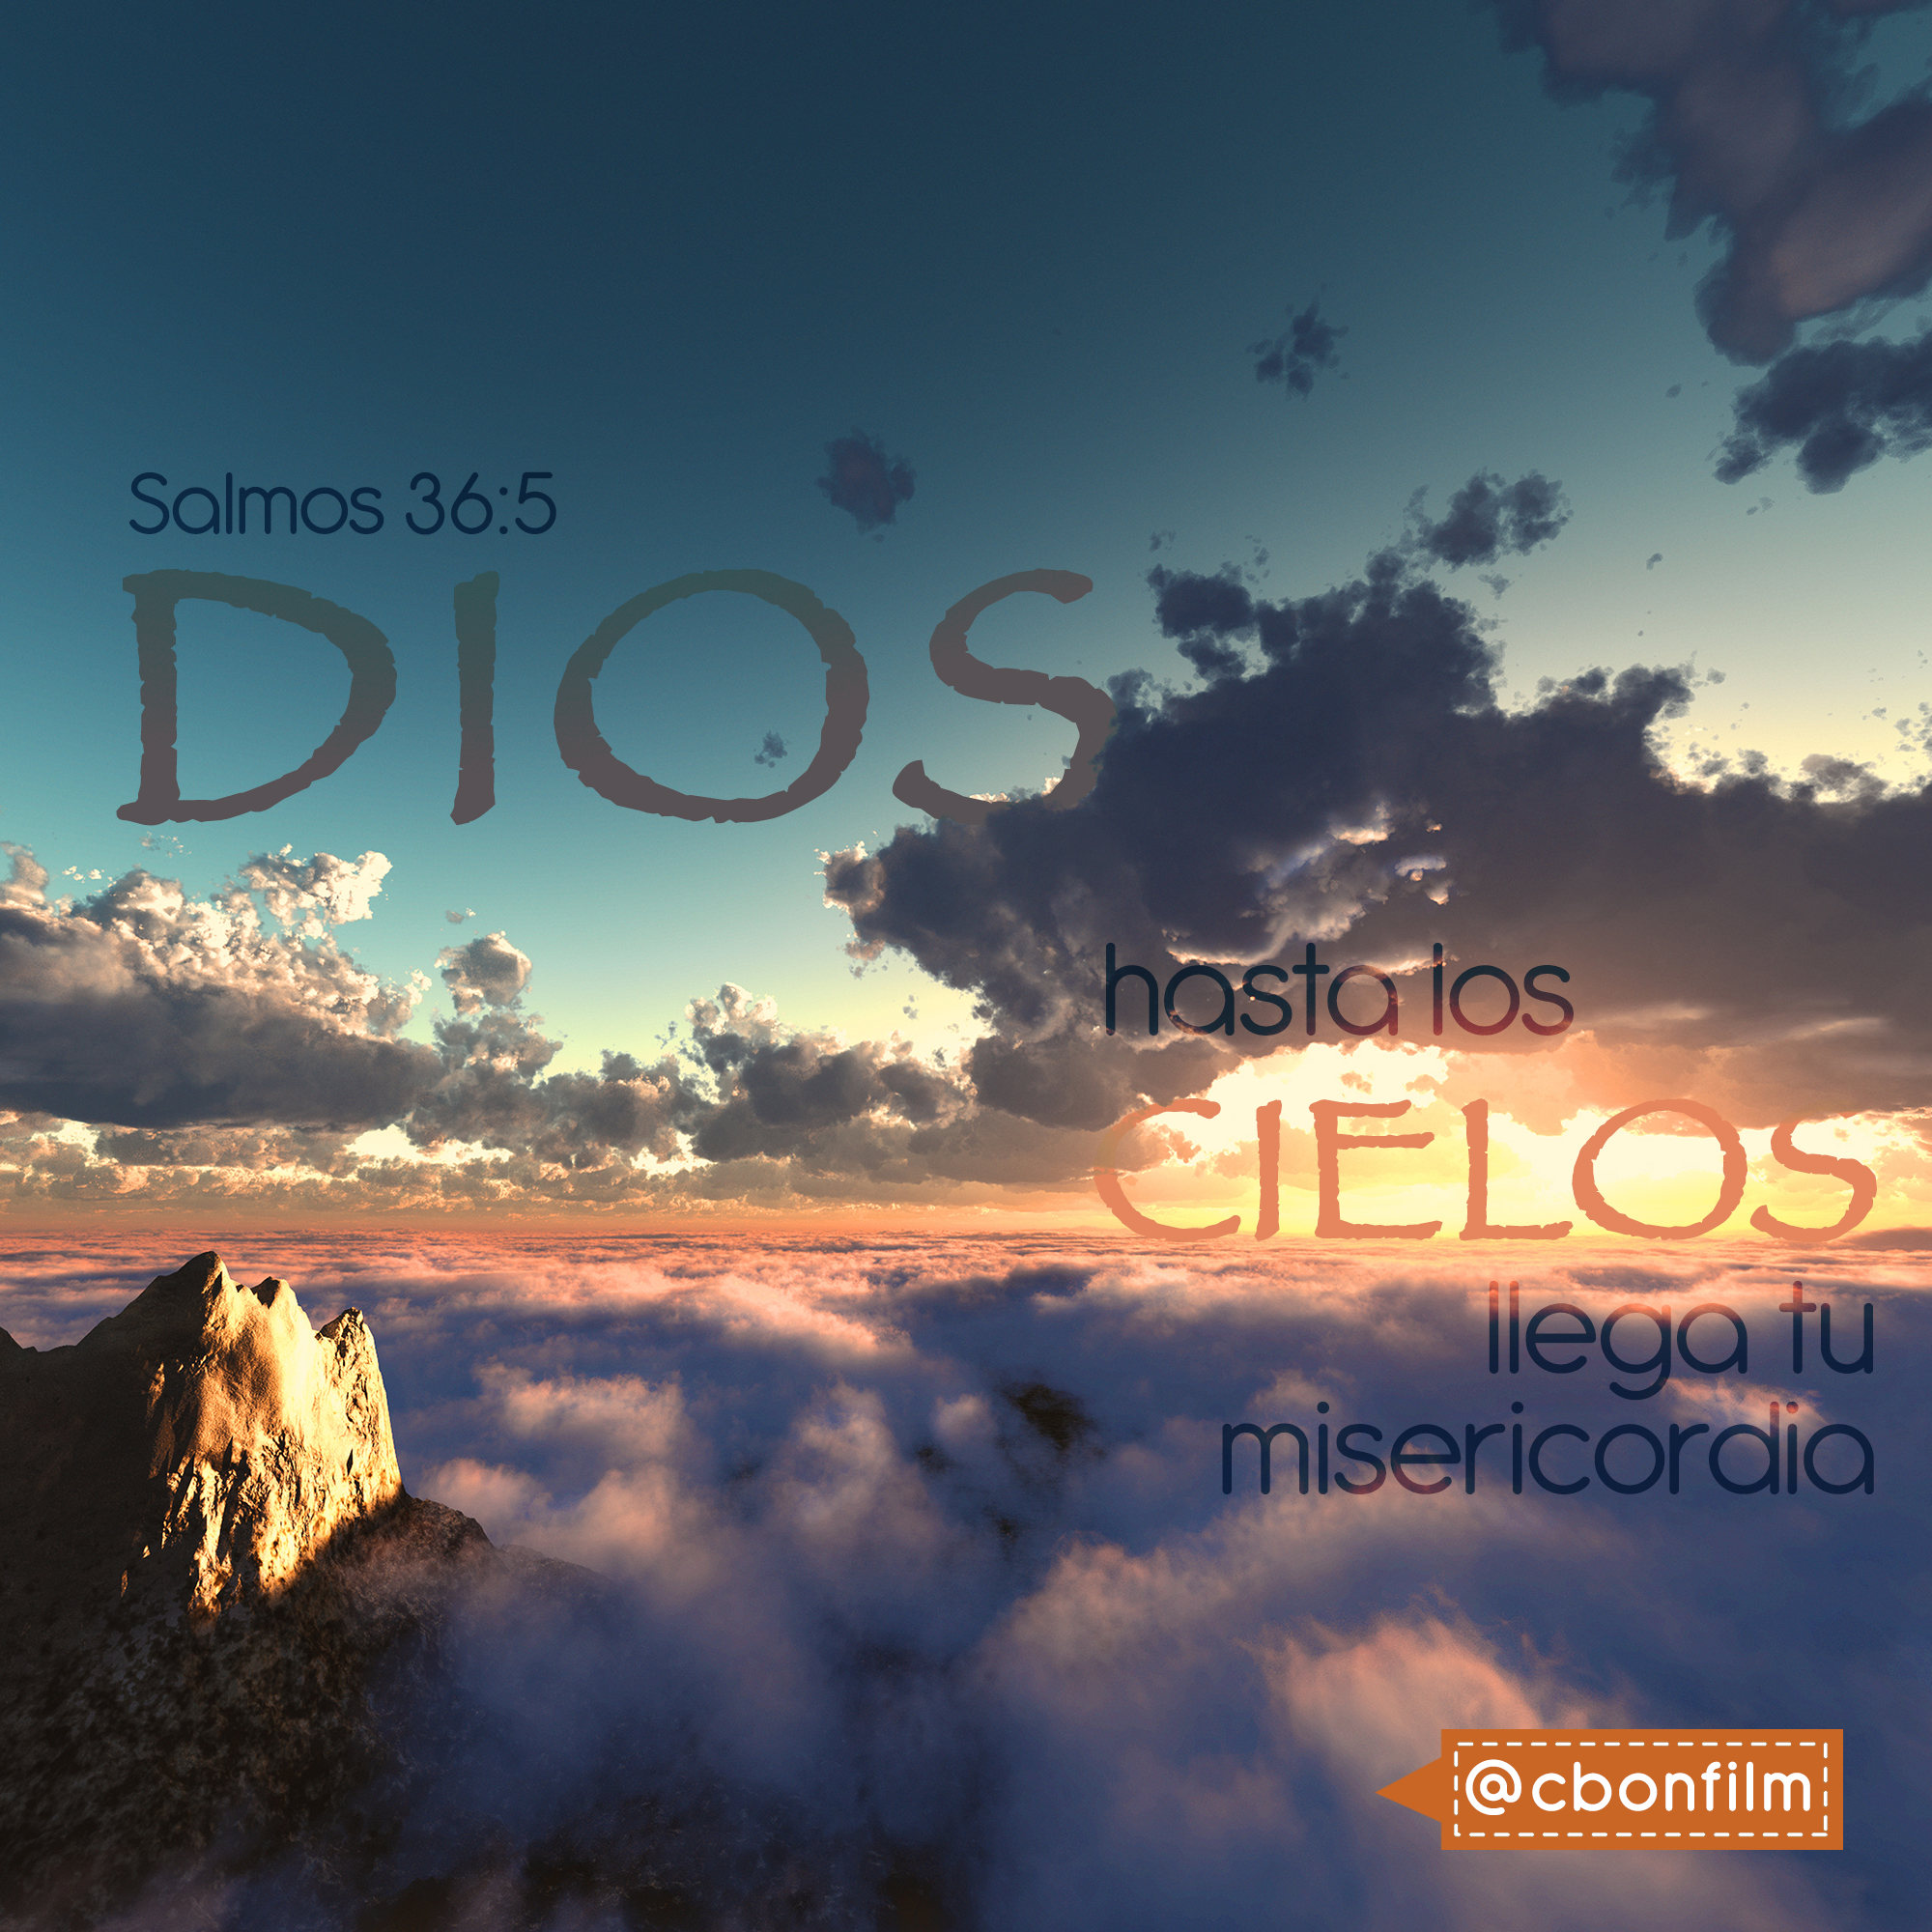 Christian Wallpapers In Spanish - HD Wallpaper 